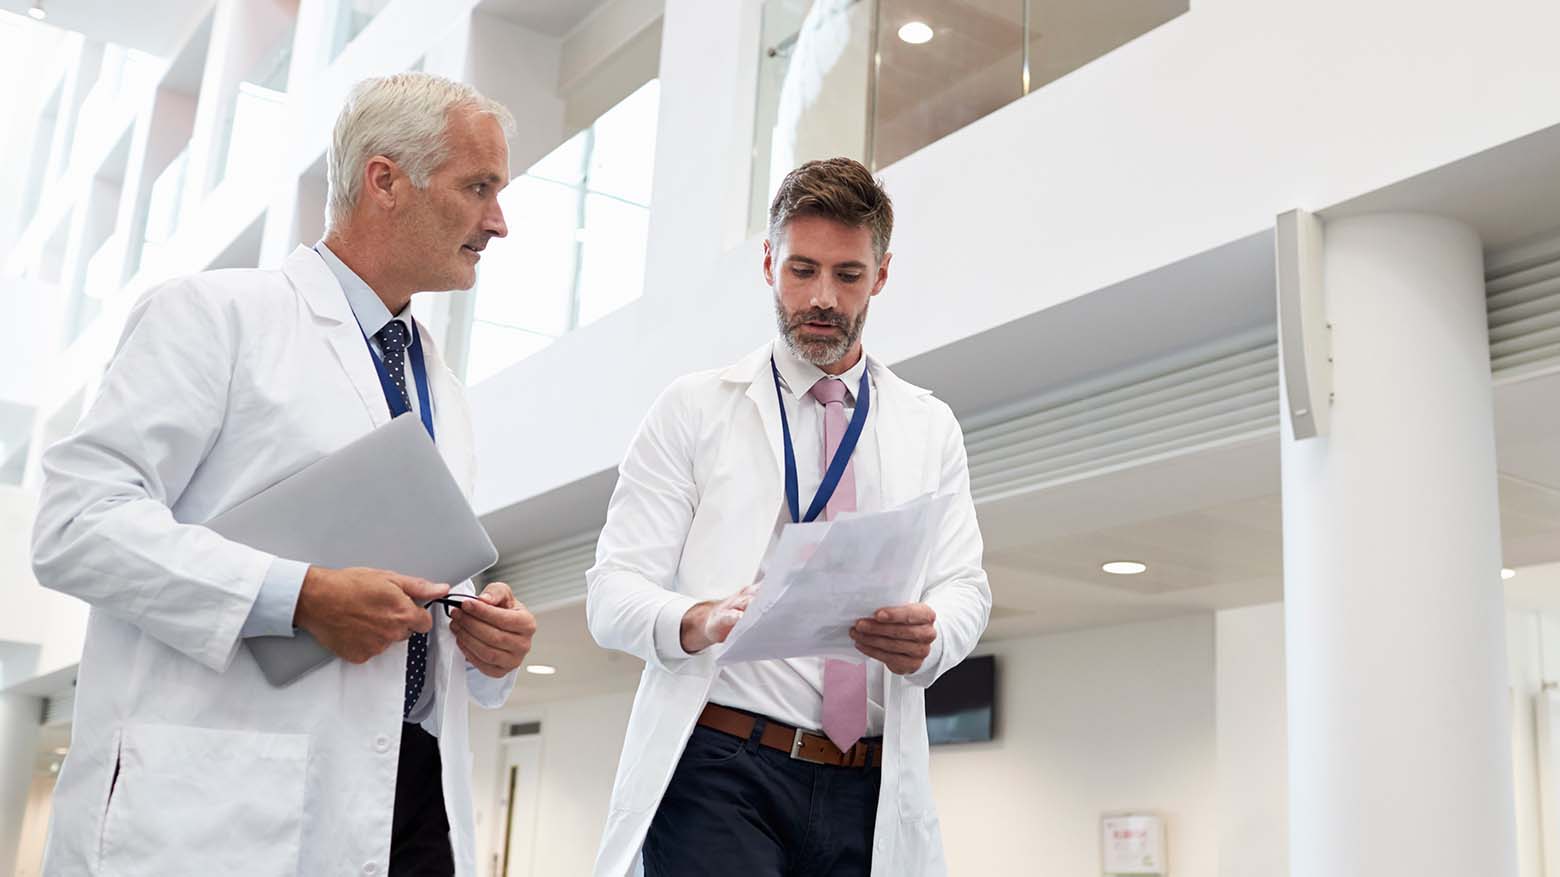 A male doctor discusses paperwork while walking with an older male doctor